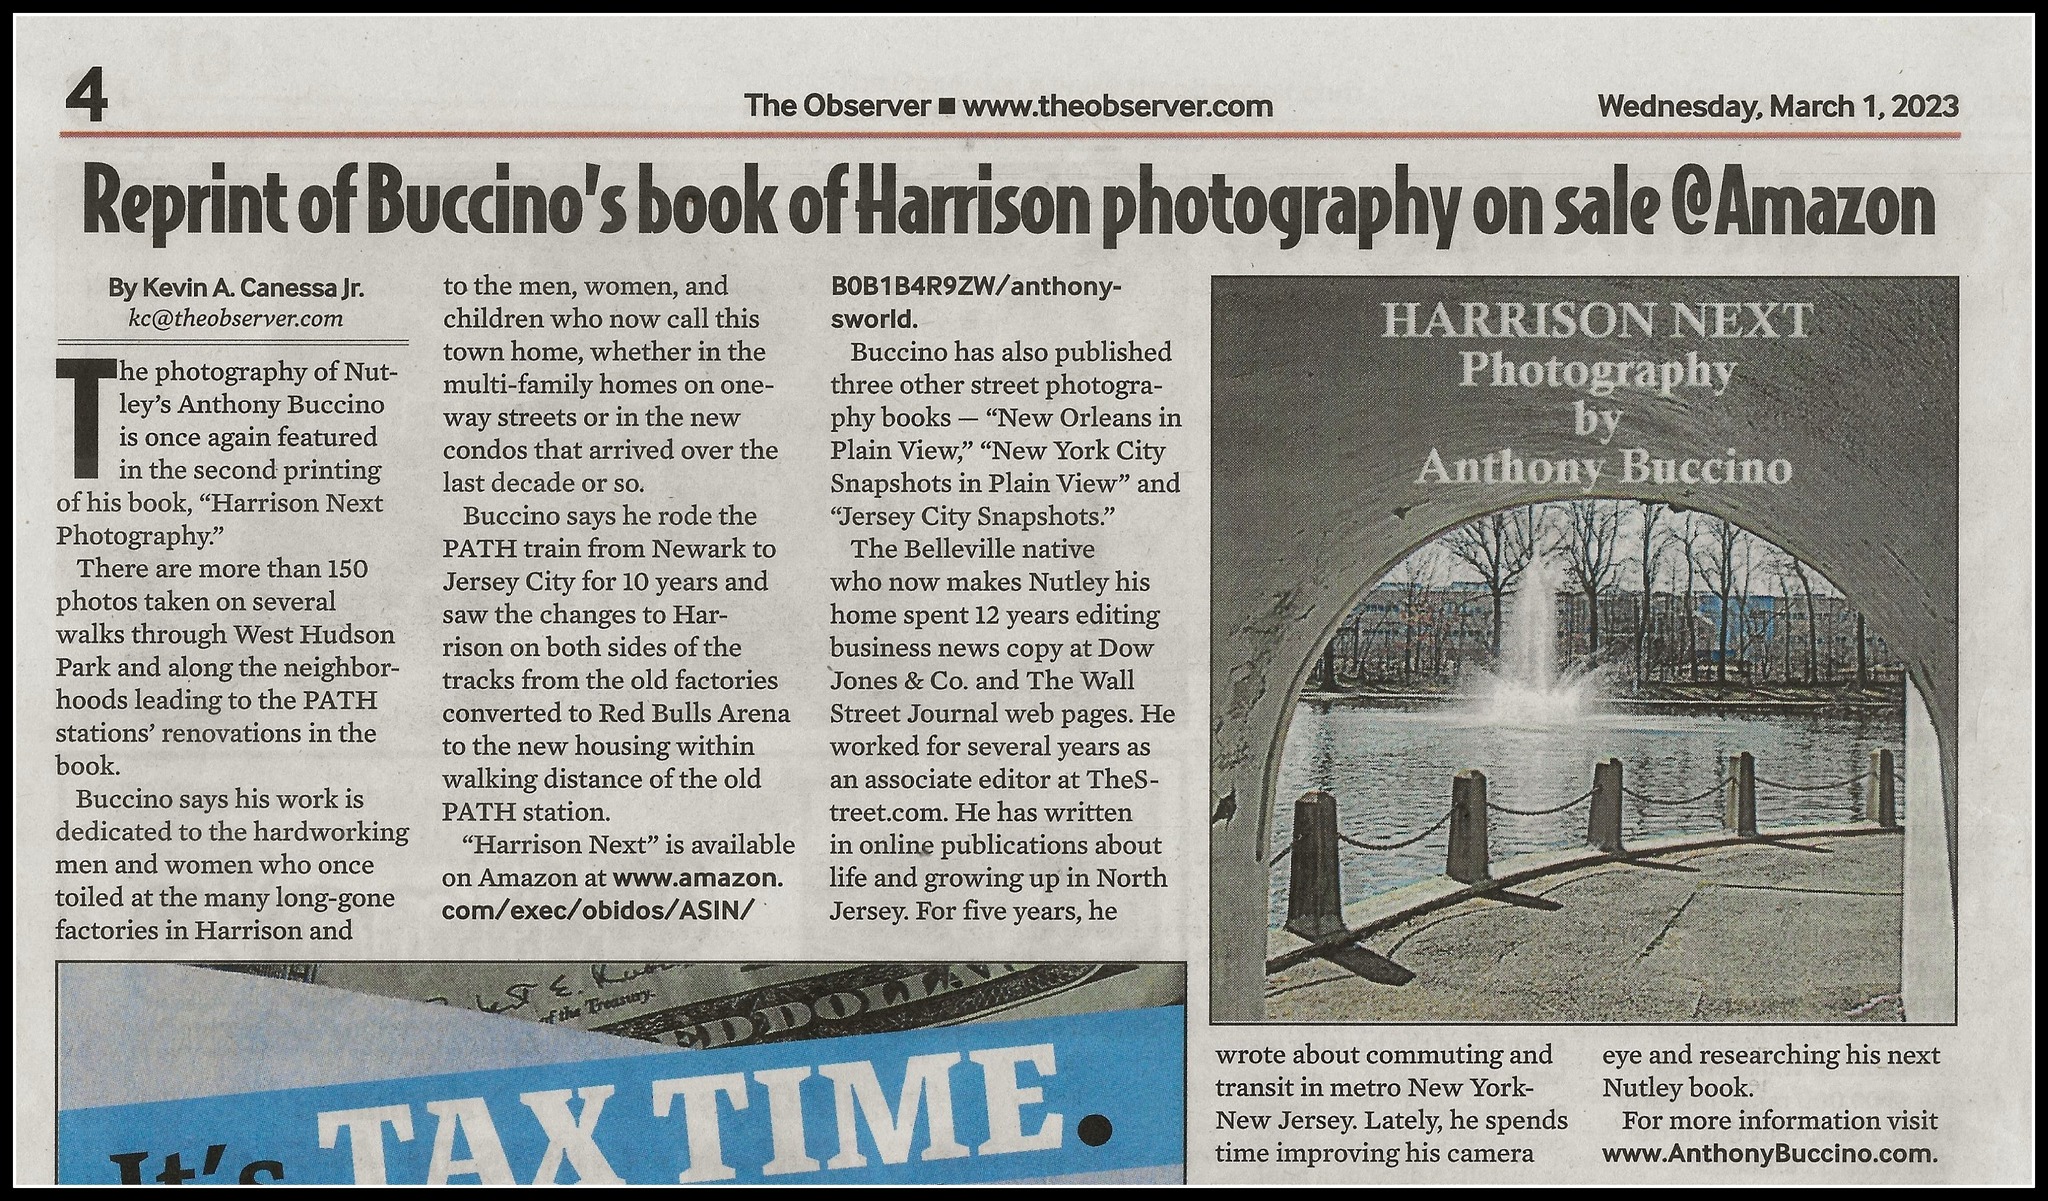 HARRISON NEXT Photography by Anthony Buccino 